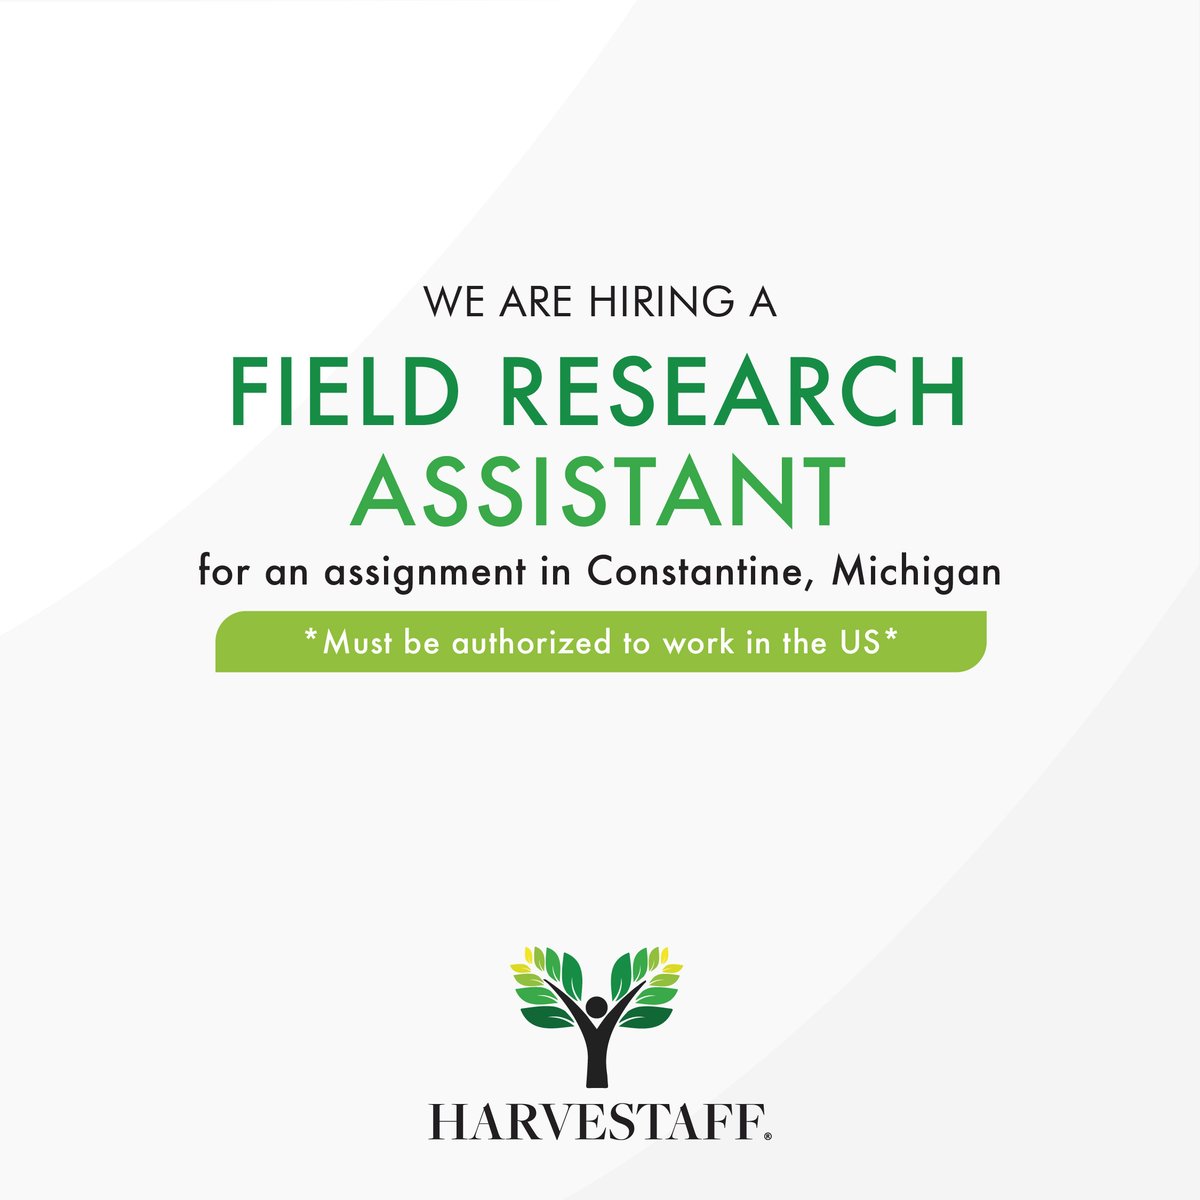 We are hiring a Field Research Assistant for an assignment in Constantine, Michigan, to apply and for more information please visit the following link:

lnkd.in/erk5cy_d

#FieldResearch #Assistant #Constantine #Michigan #Job #Jobs #HiringNow #JobAlert #Hiring #Vacancy